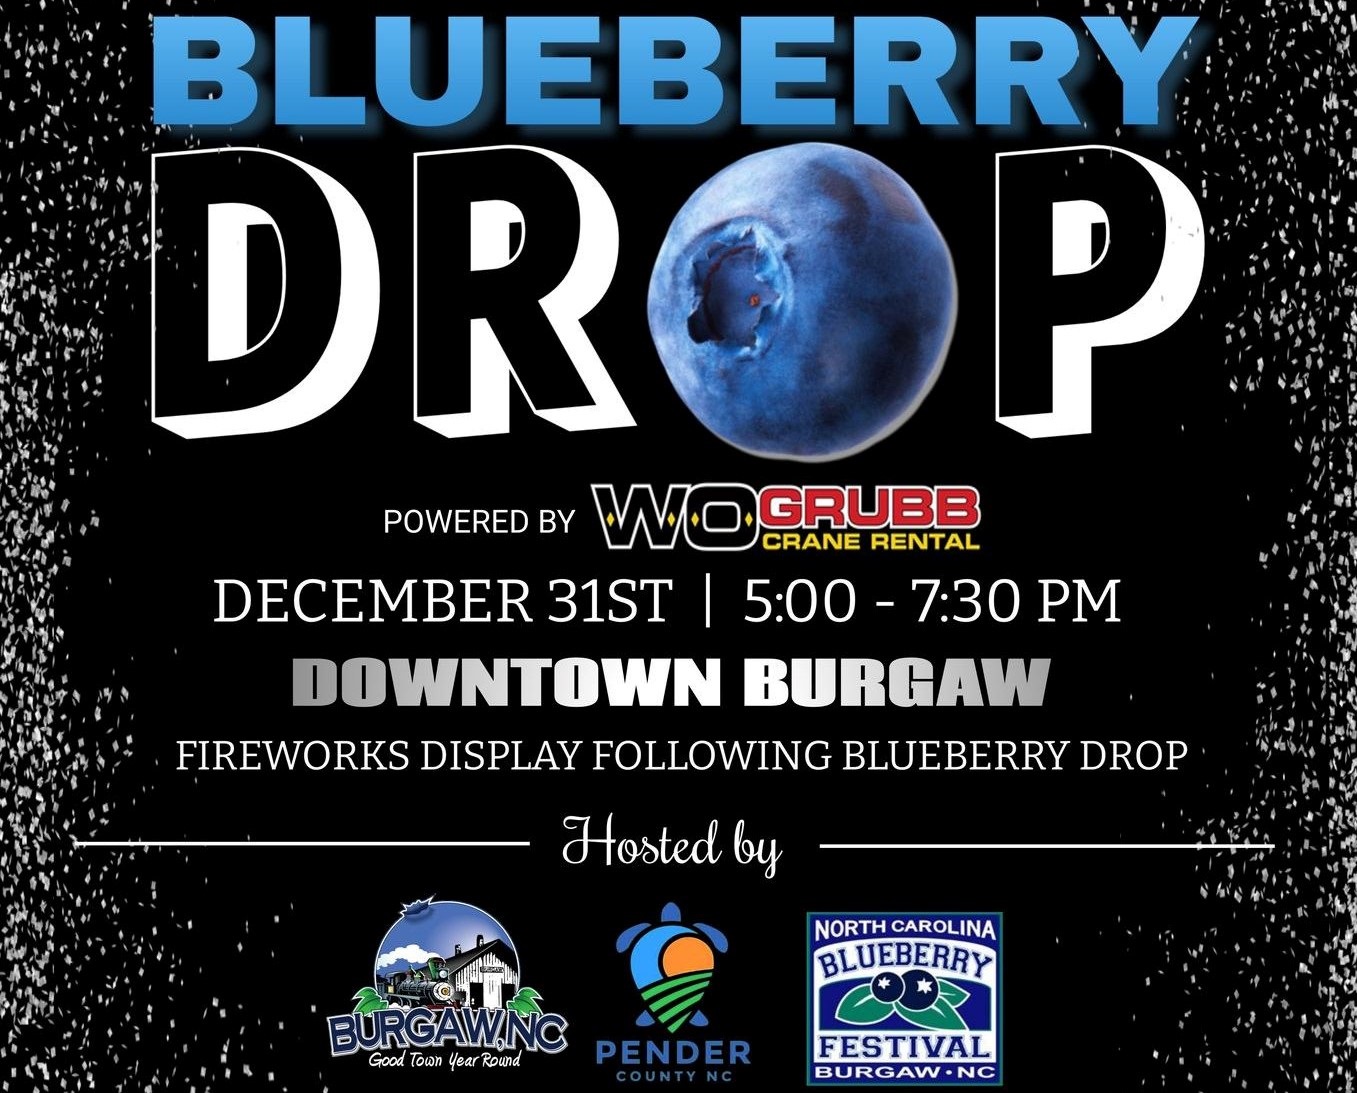 Annual New Years Eve Blueberry Drop